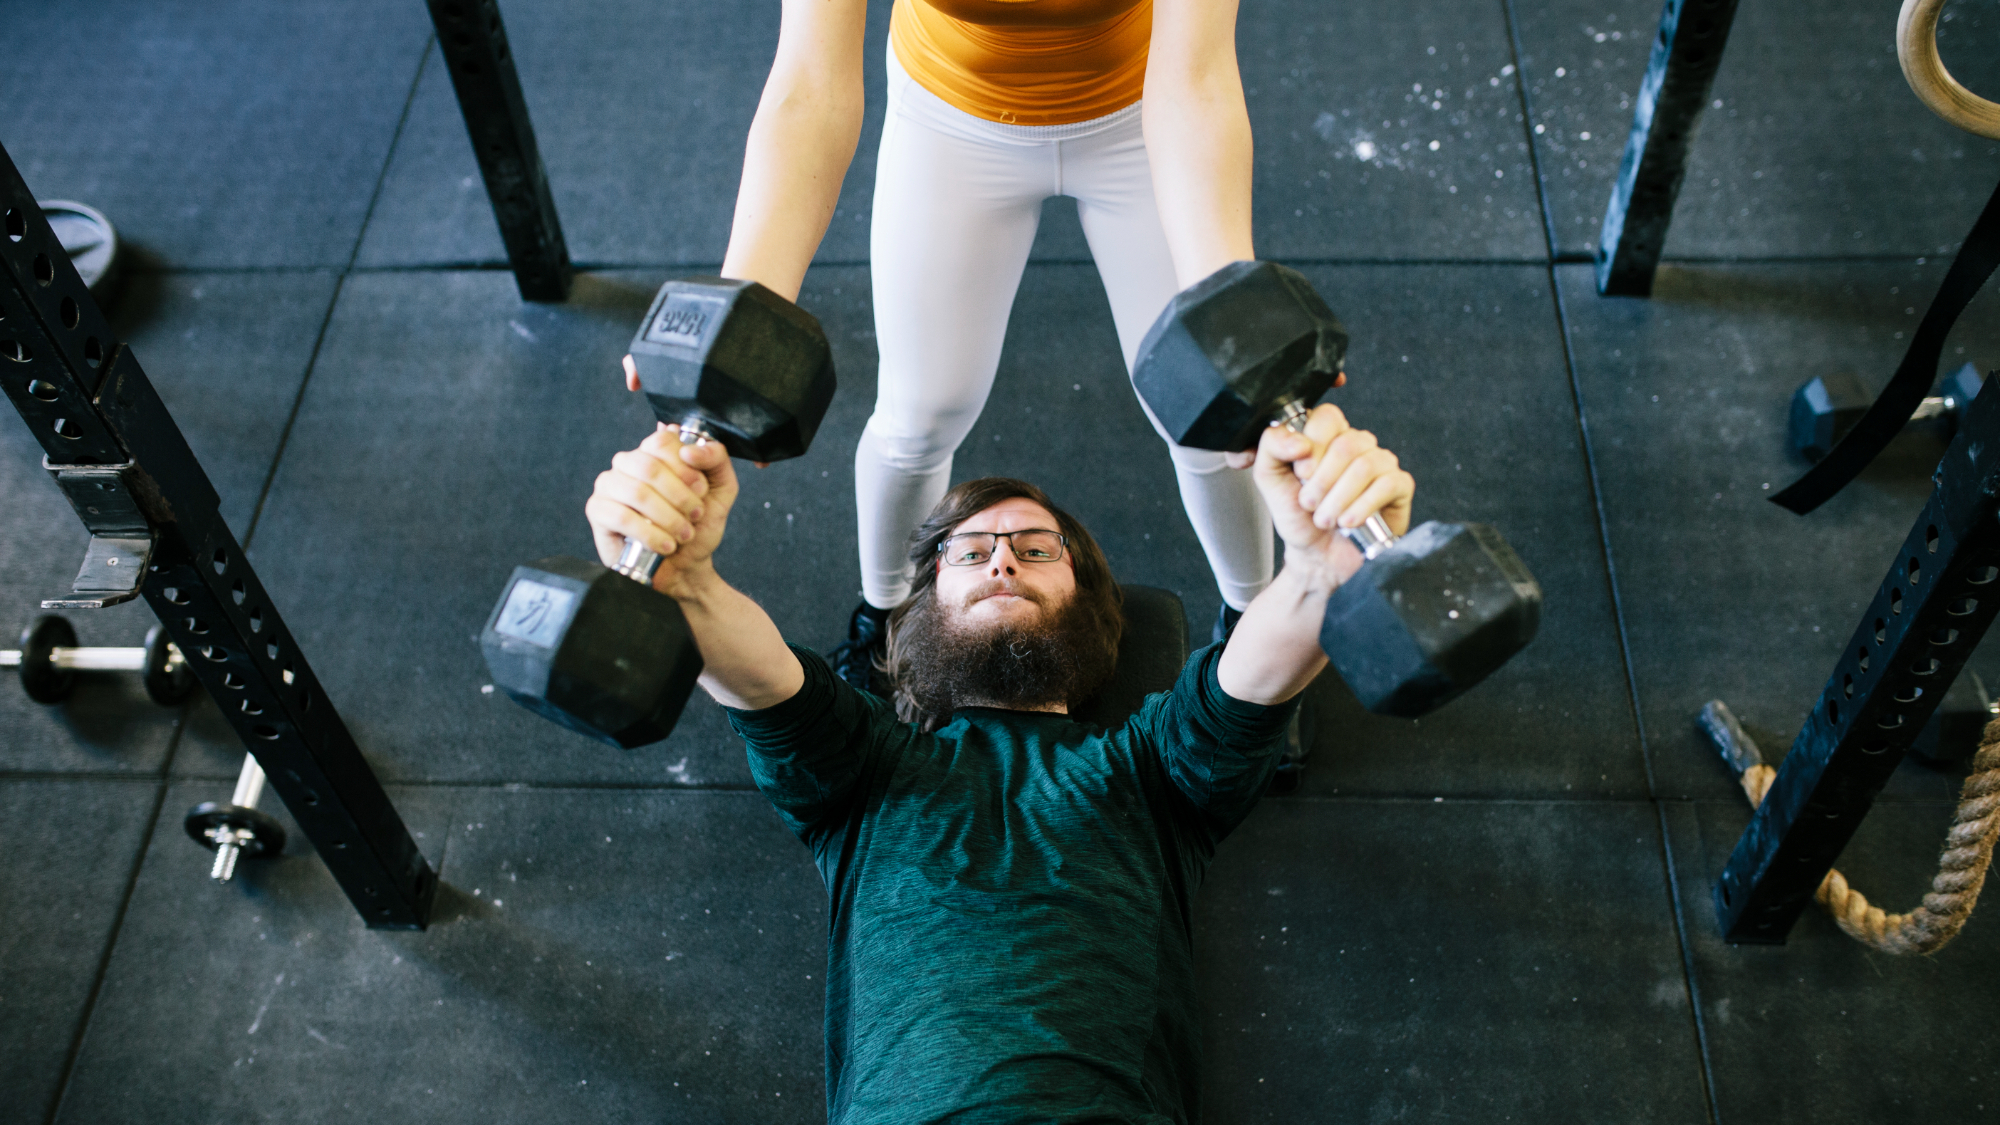 Ask a Trainer: When to Use Light Weights vs Heavy Weights